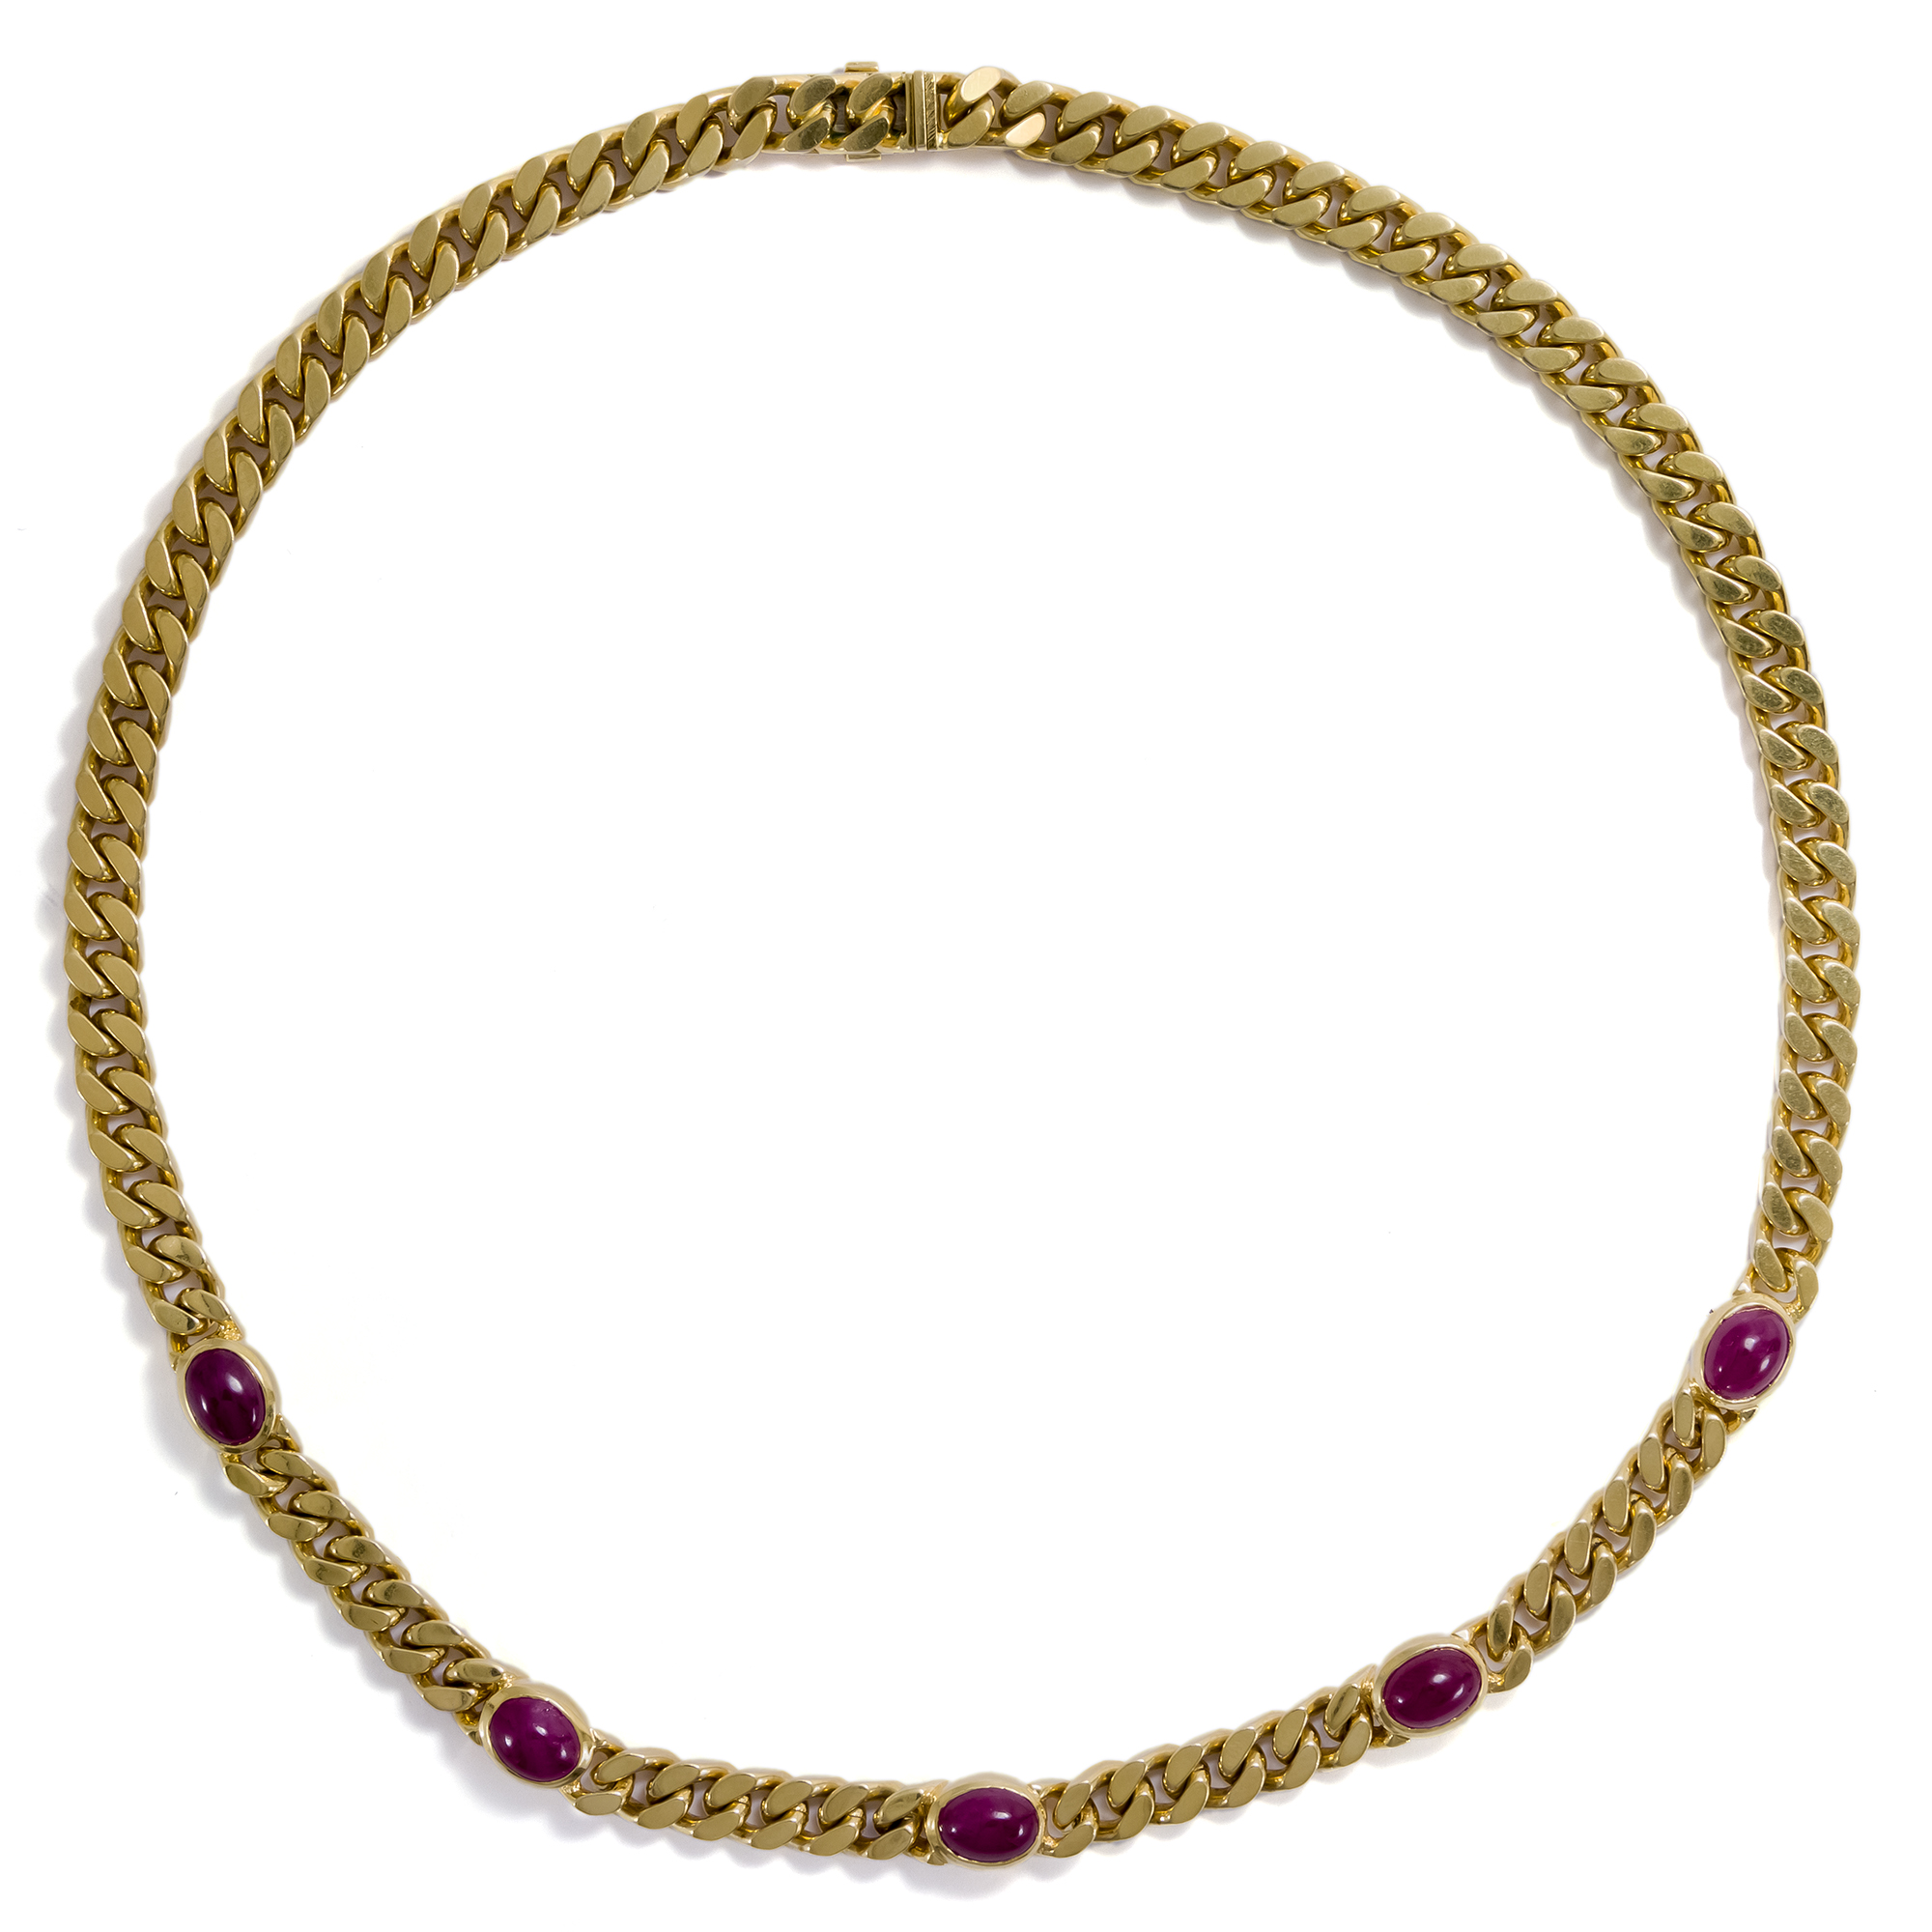 Massive Vintage Necklace Of High Quality Gold & Rubies, Germany ca. 1990